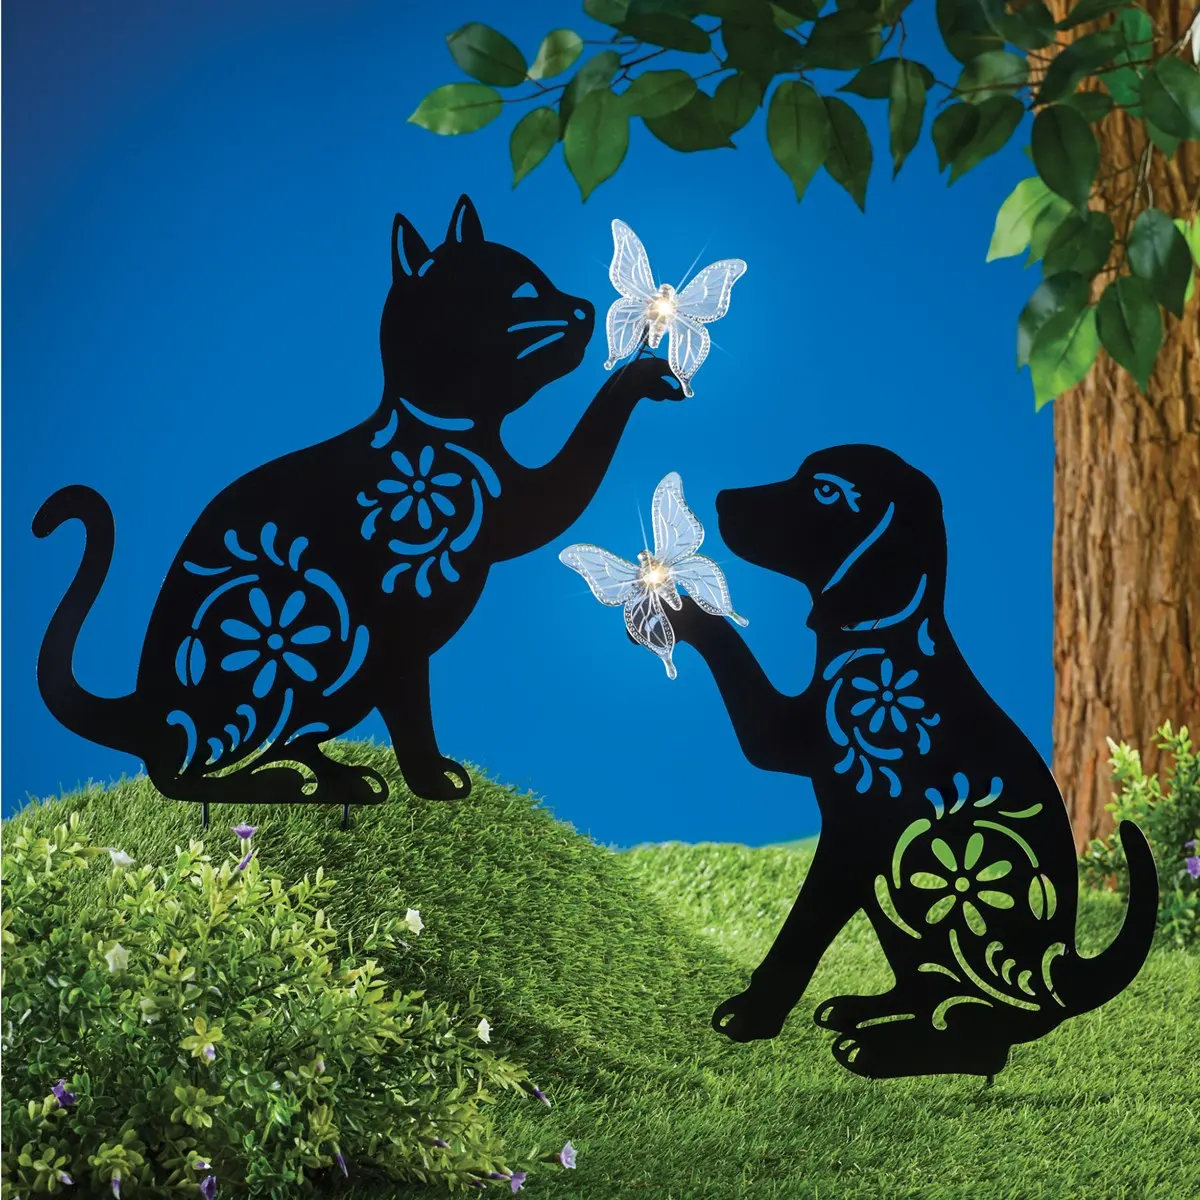 Metal Animal Cat Silhouette Garden Solar Powered Stake Lights Playing Butterfly on Paw Yard Decoration